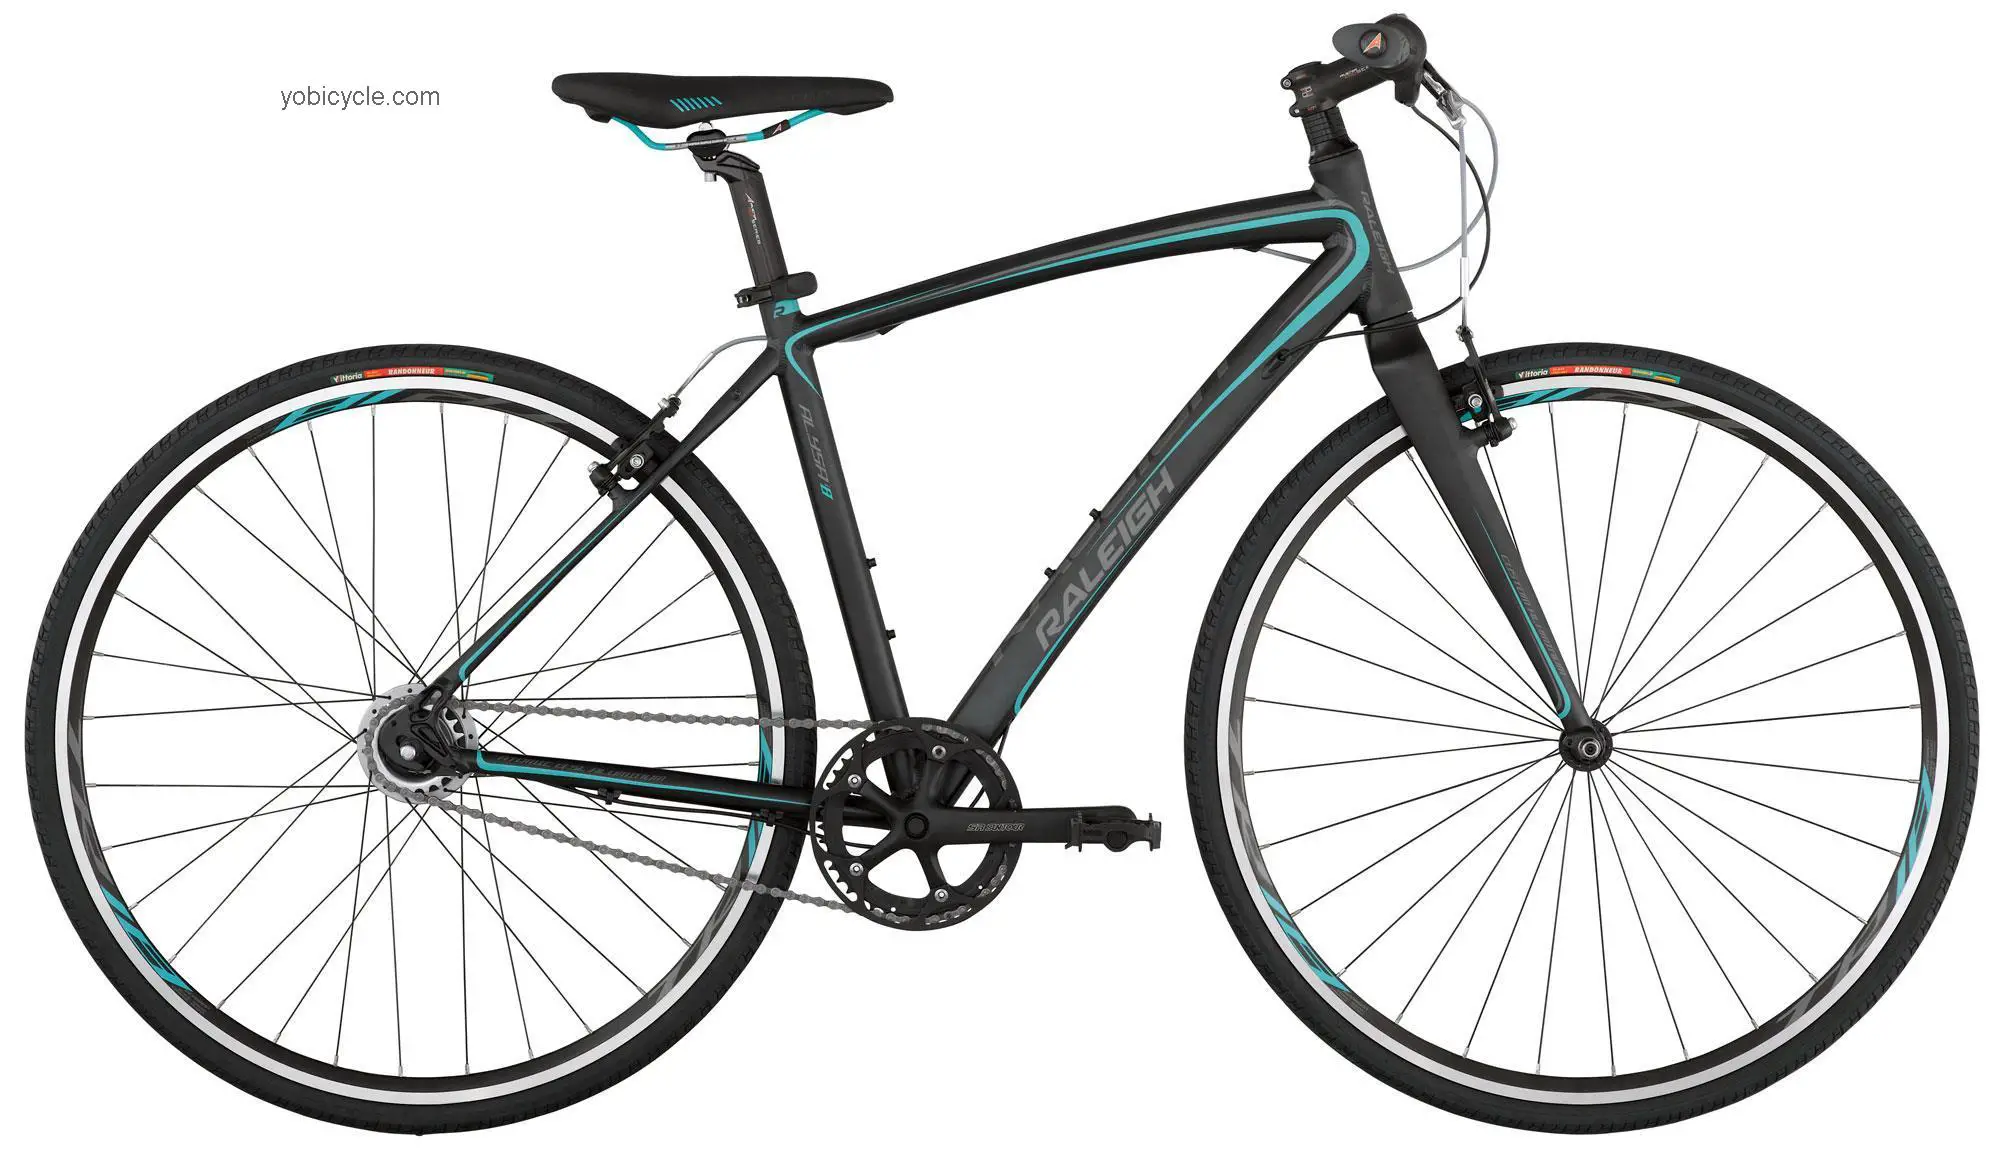 Raleigh Alysa i8 competitors and comparison tool online specs and performance